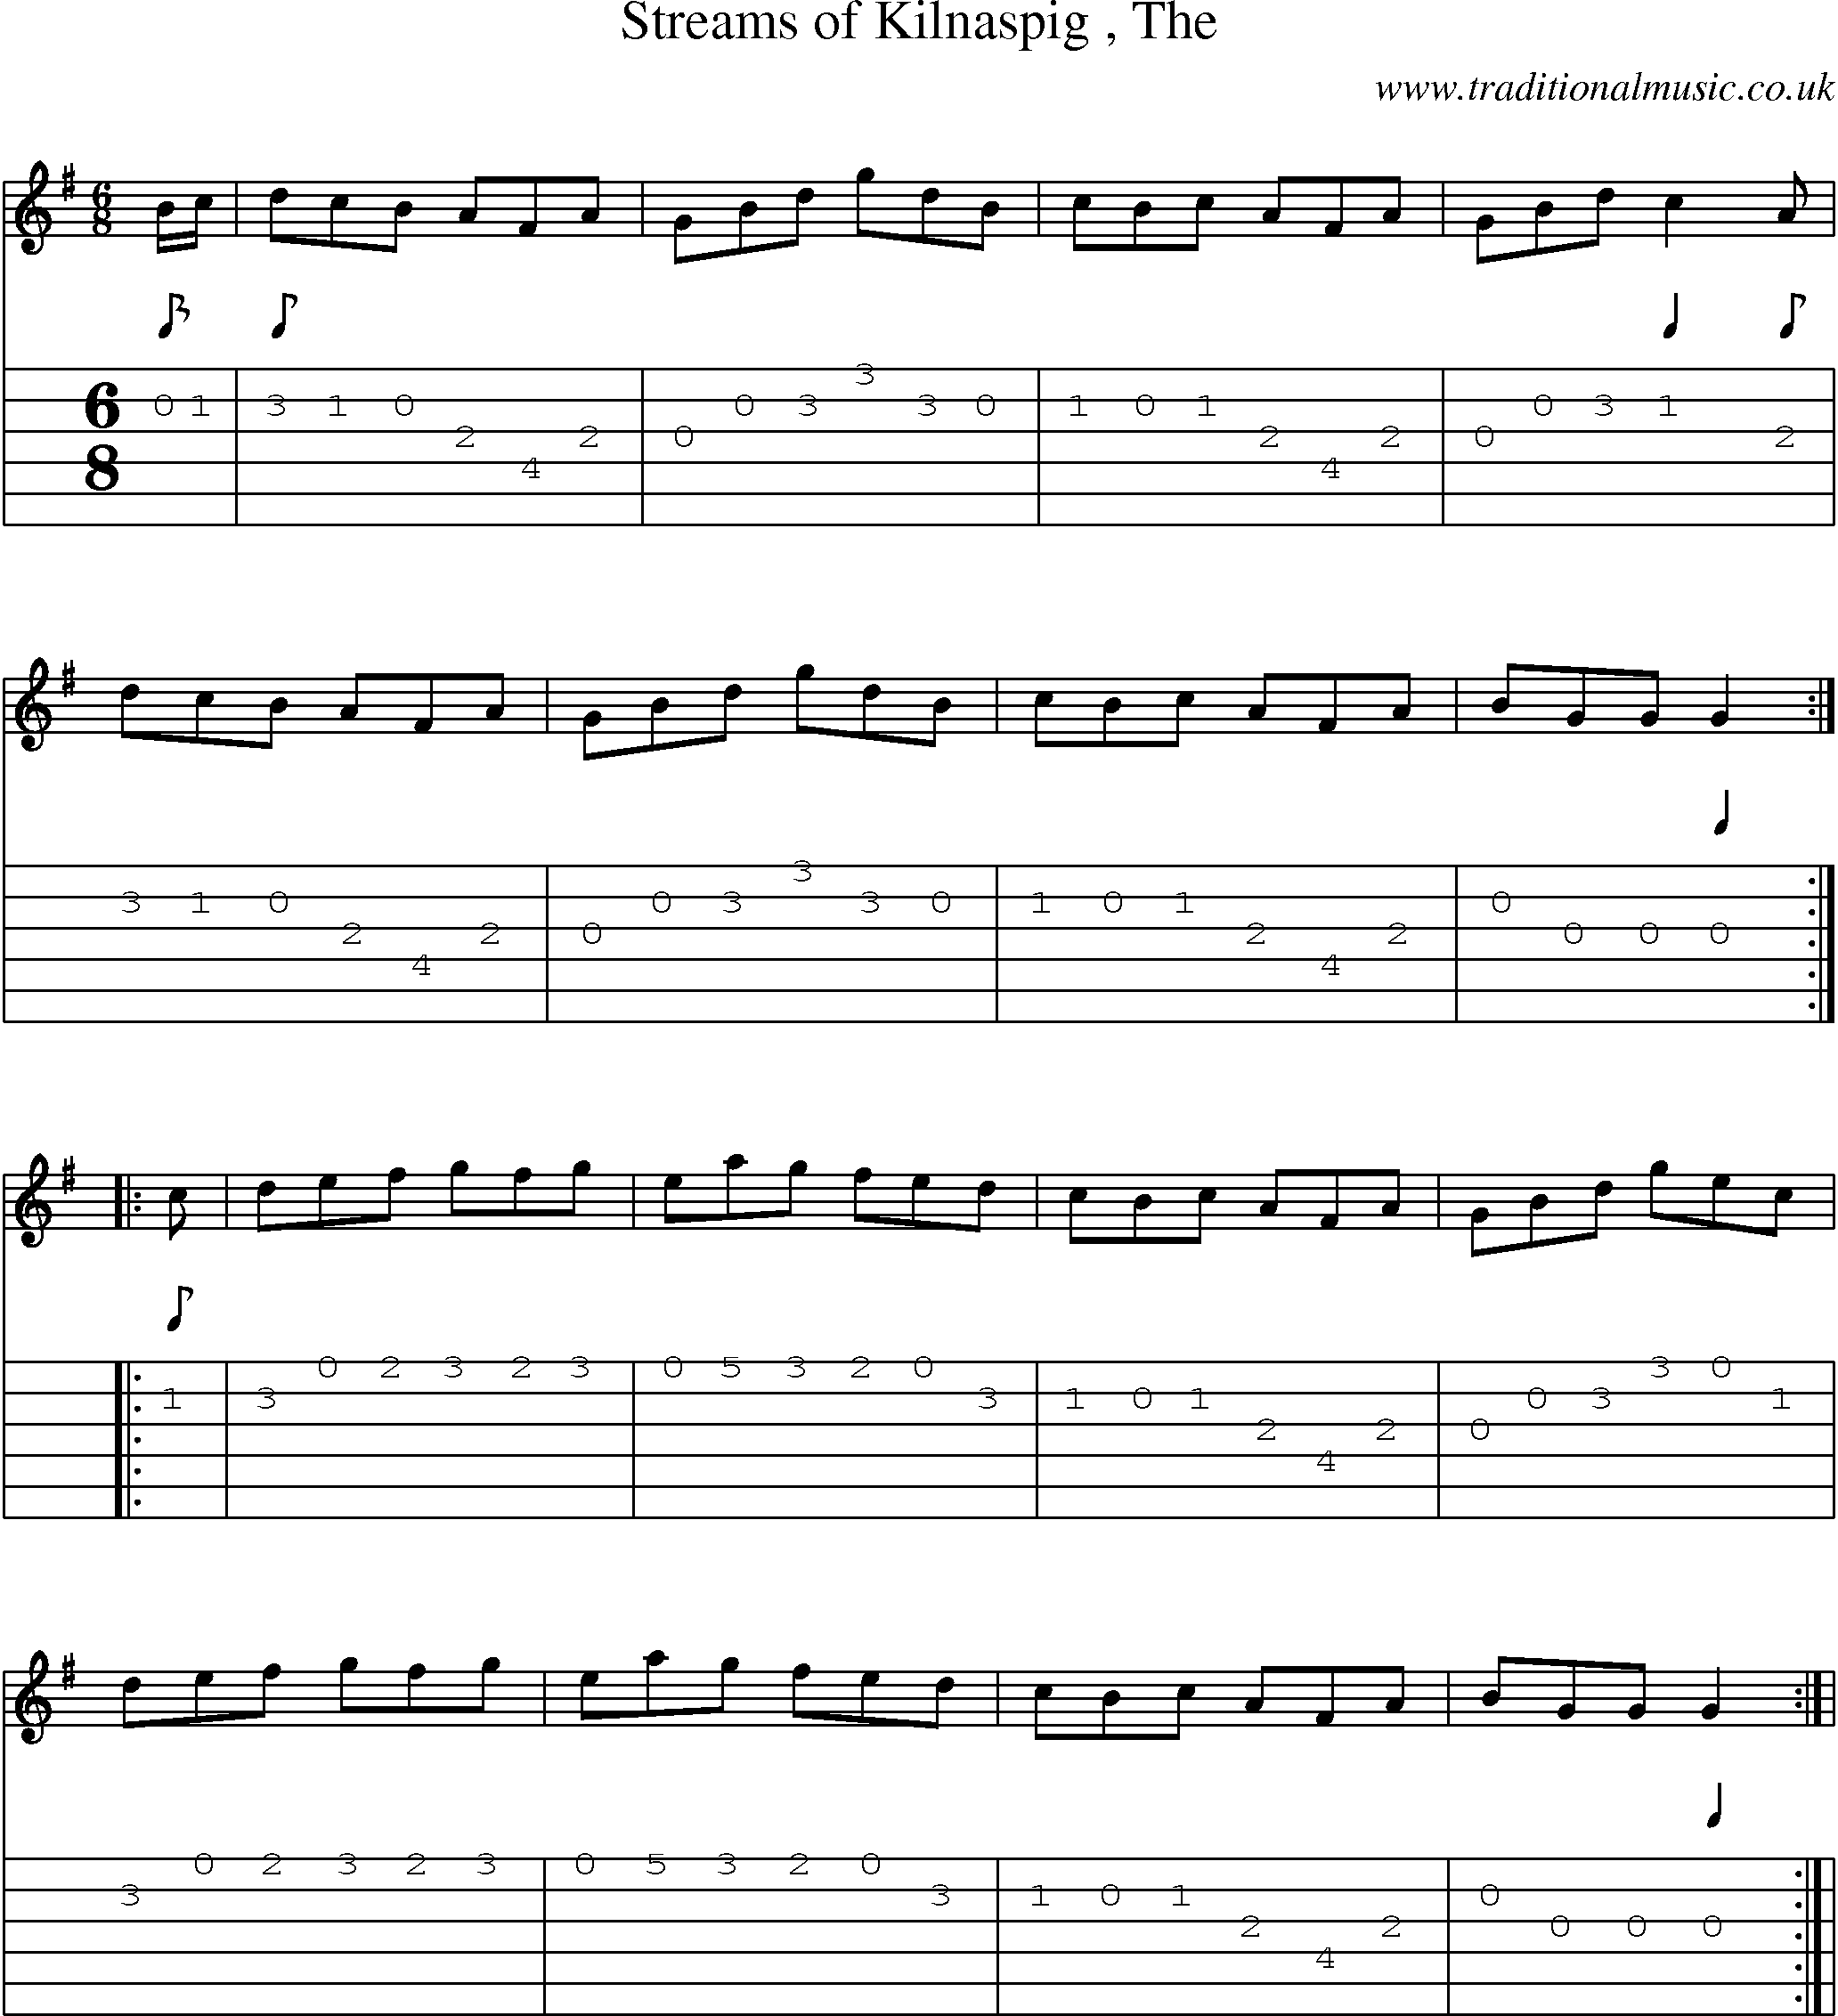 Music Score and Guitar Tabs for Streams Of Kilnaspig